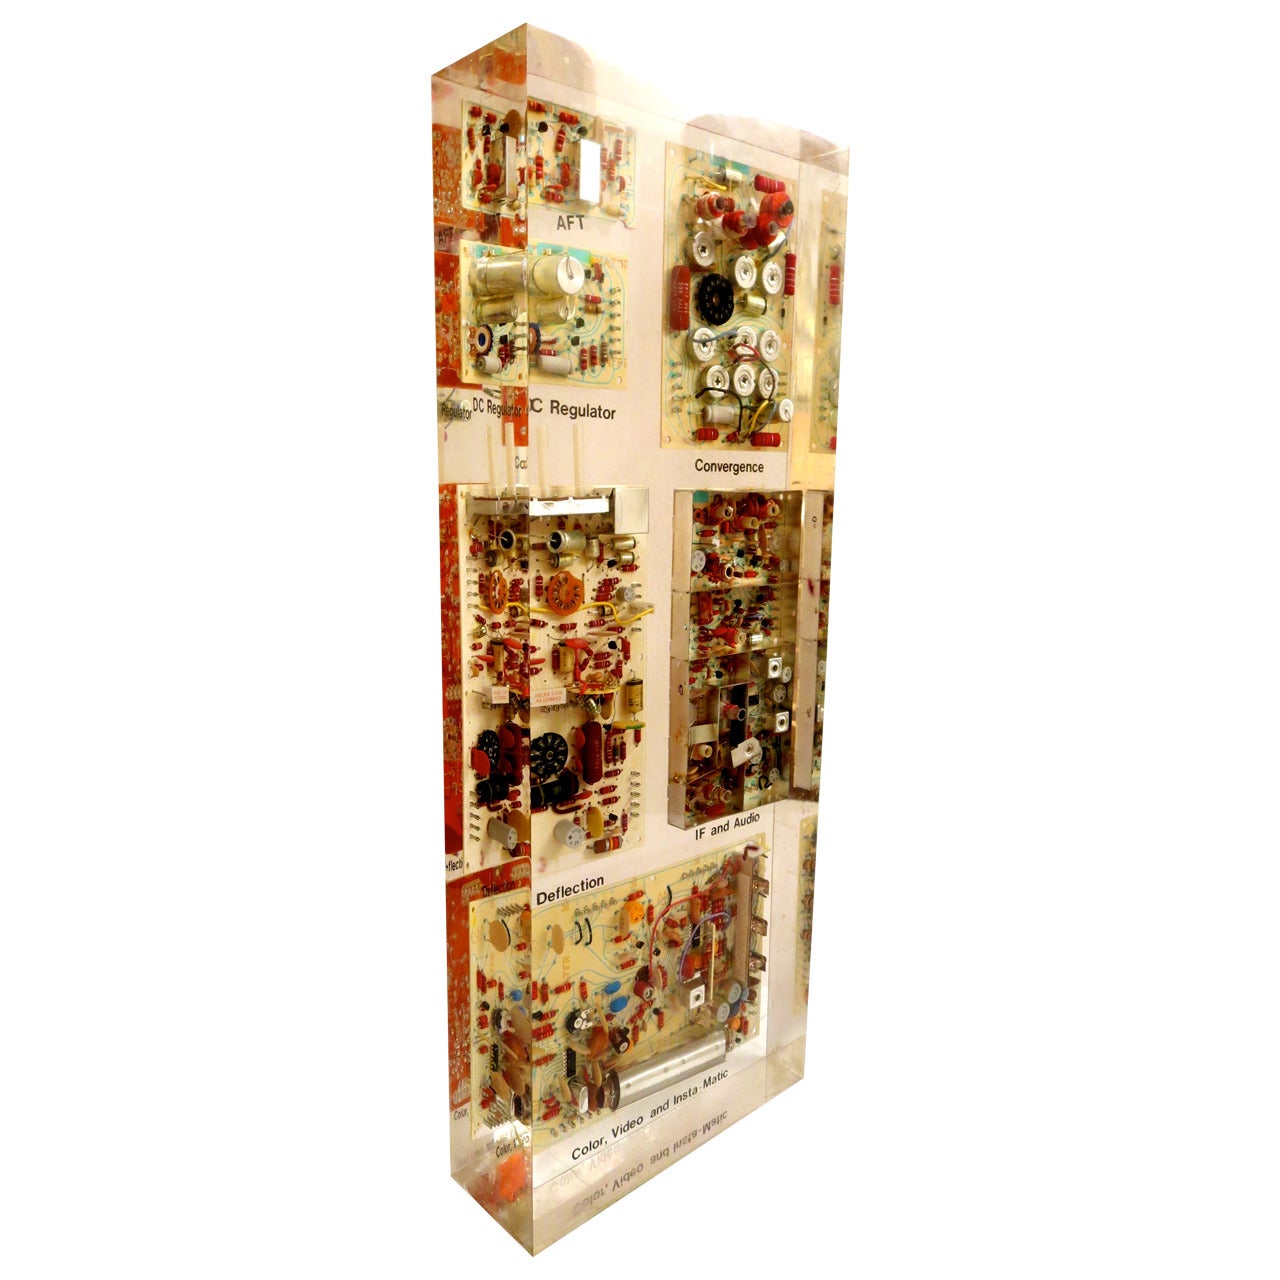 Large and Unique Circuit Board Lucite Wall Sculpture, circa 1980s